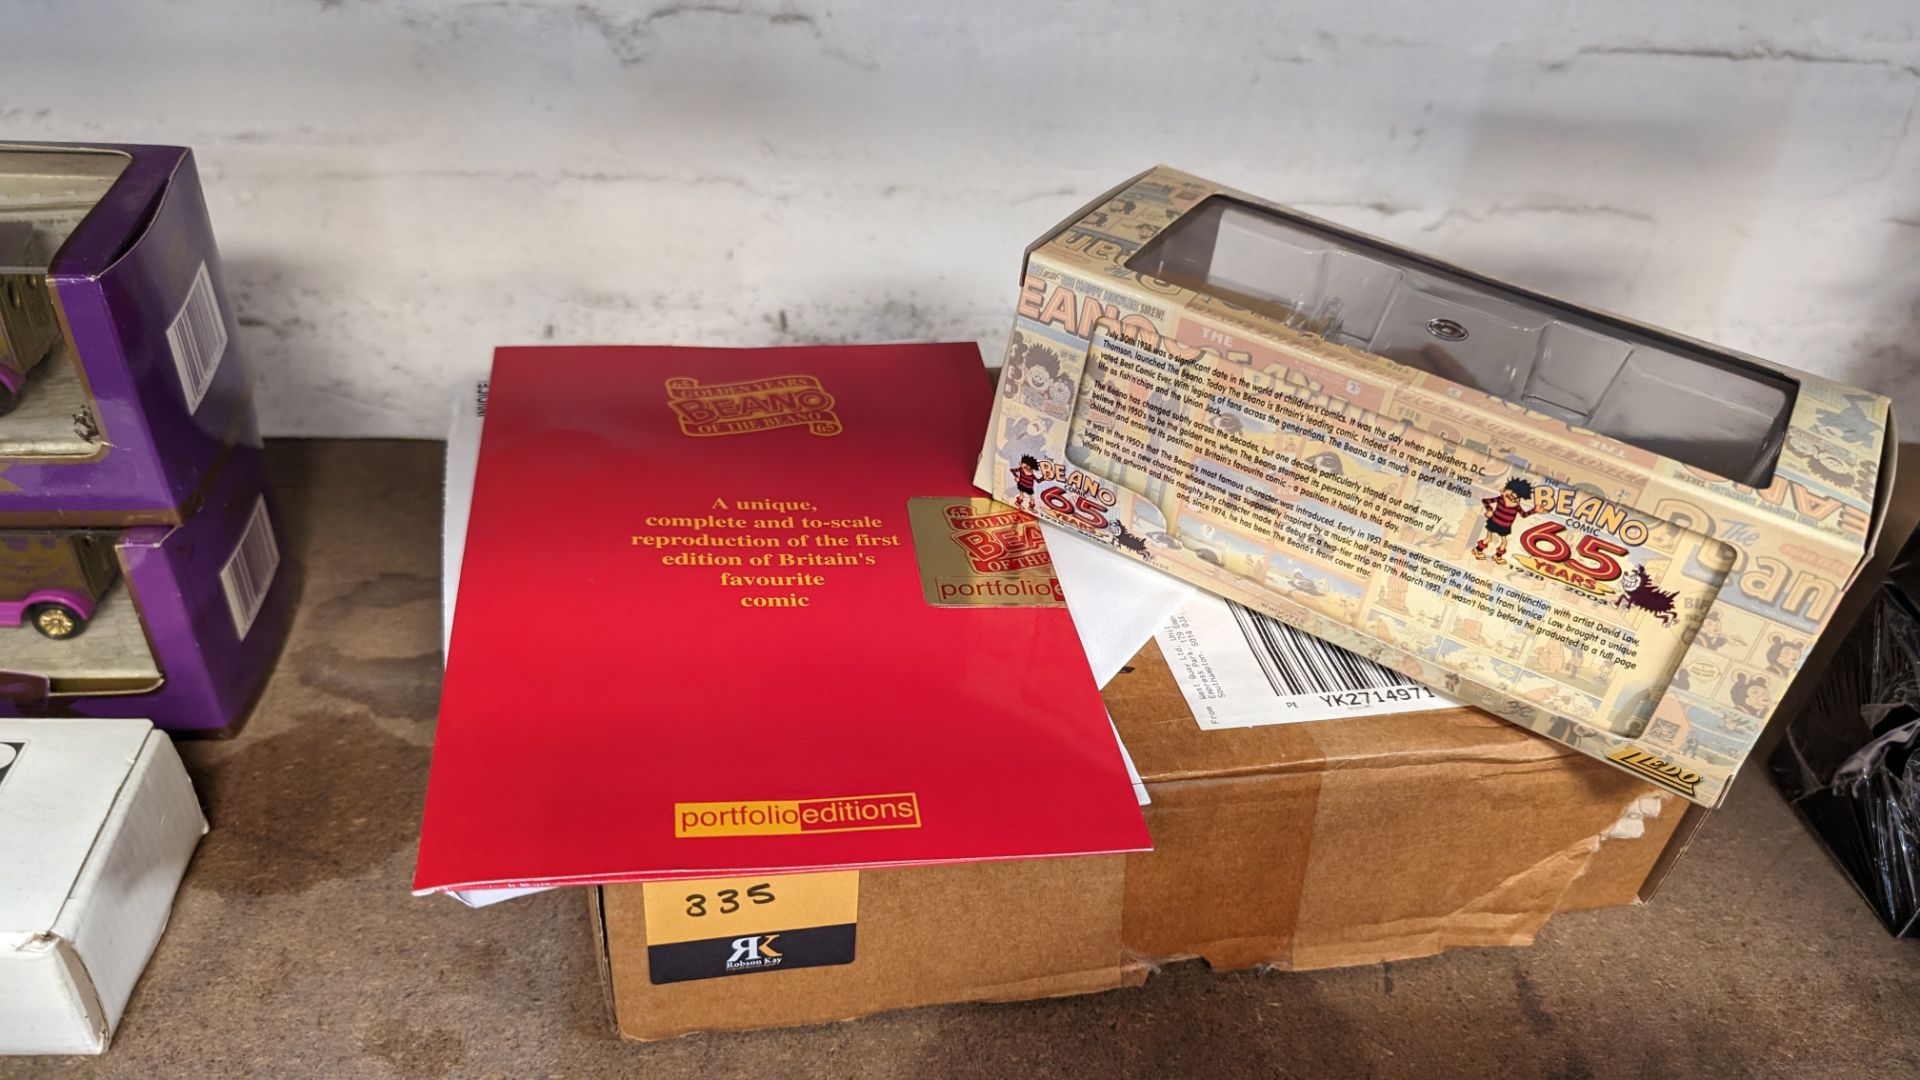 Beano 65th anniversary gift set including reproduction of the first edition of the comic plus 2 mode - Image 7 of 9